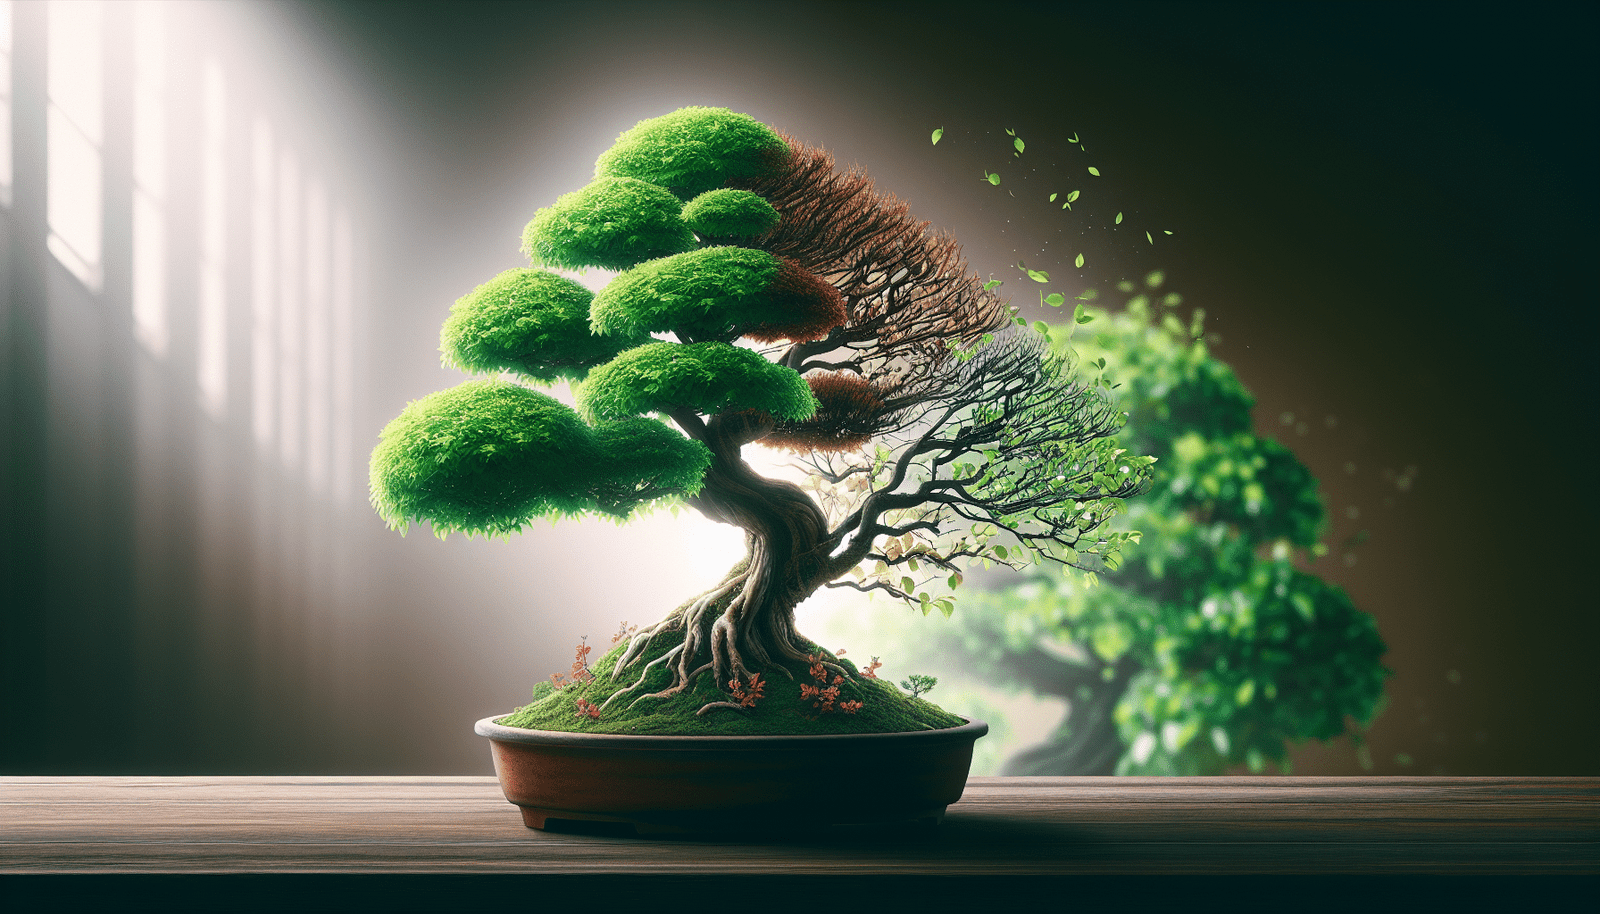 Can A Bonsai Tree Come Back To Life?